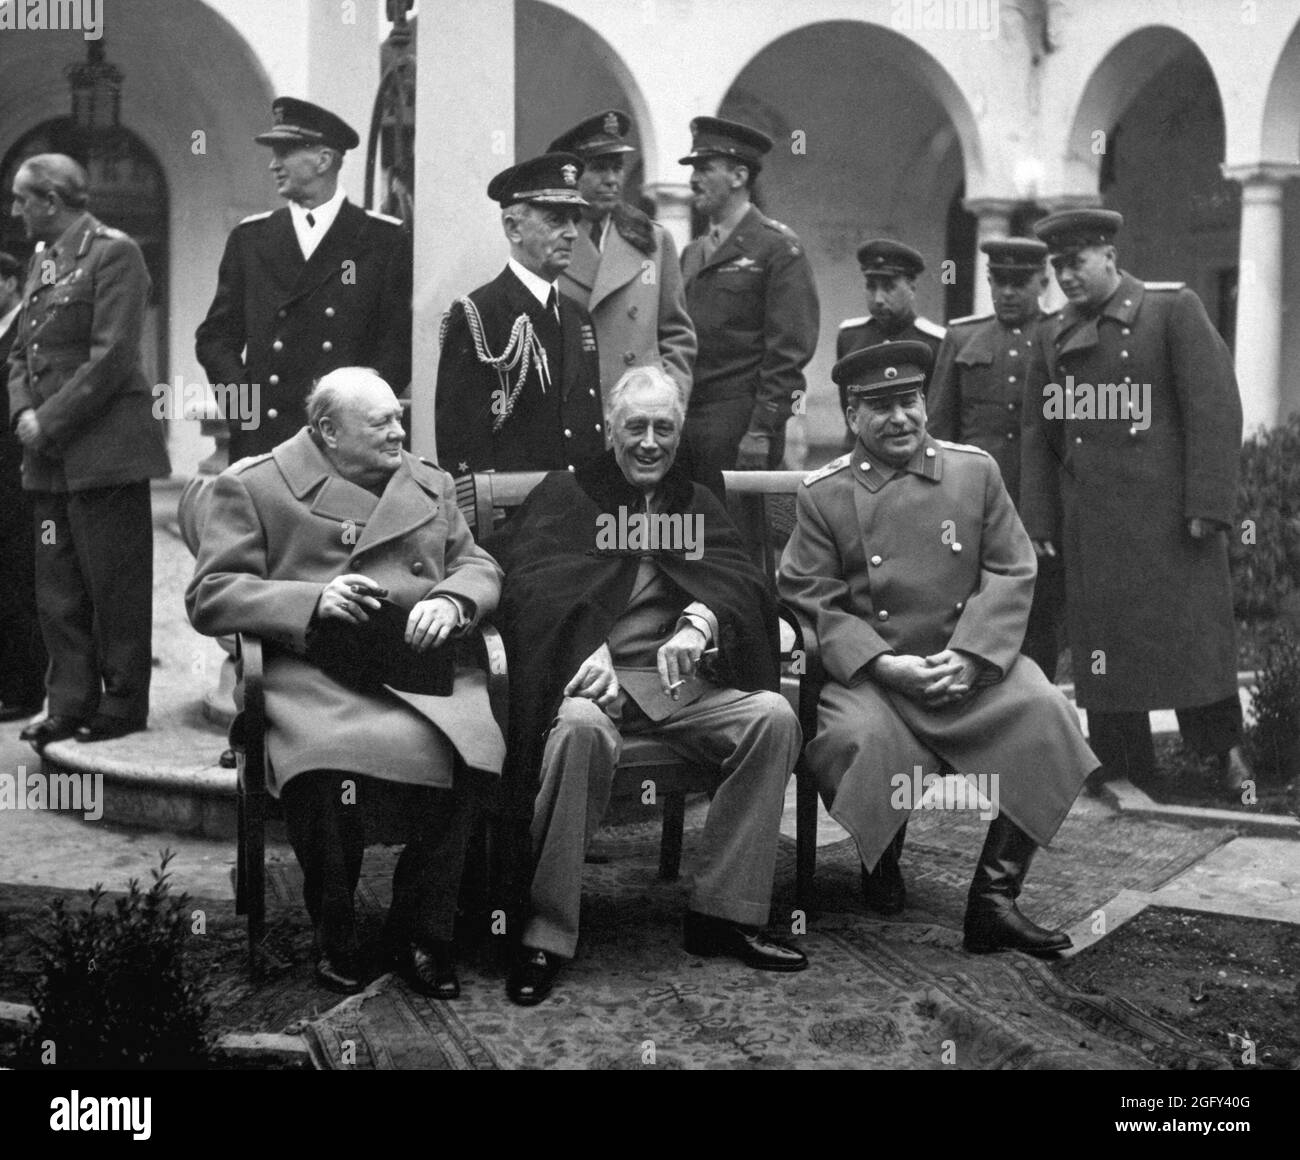 Conference of the Big Three at Yalta, also known as the Crimea Conference (codename Argonaut). Prime Minister Winston S. Churchill, President Franklin D. Roosevelt, and Premier Josef Stalin sit on the patio together, .  February 1945. Stock Photo